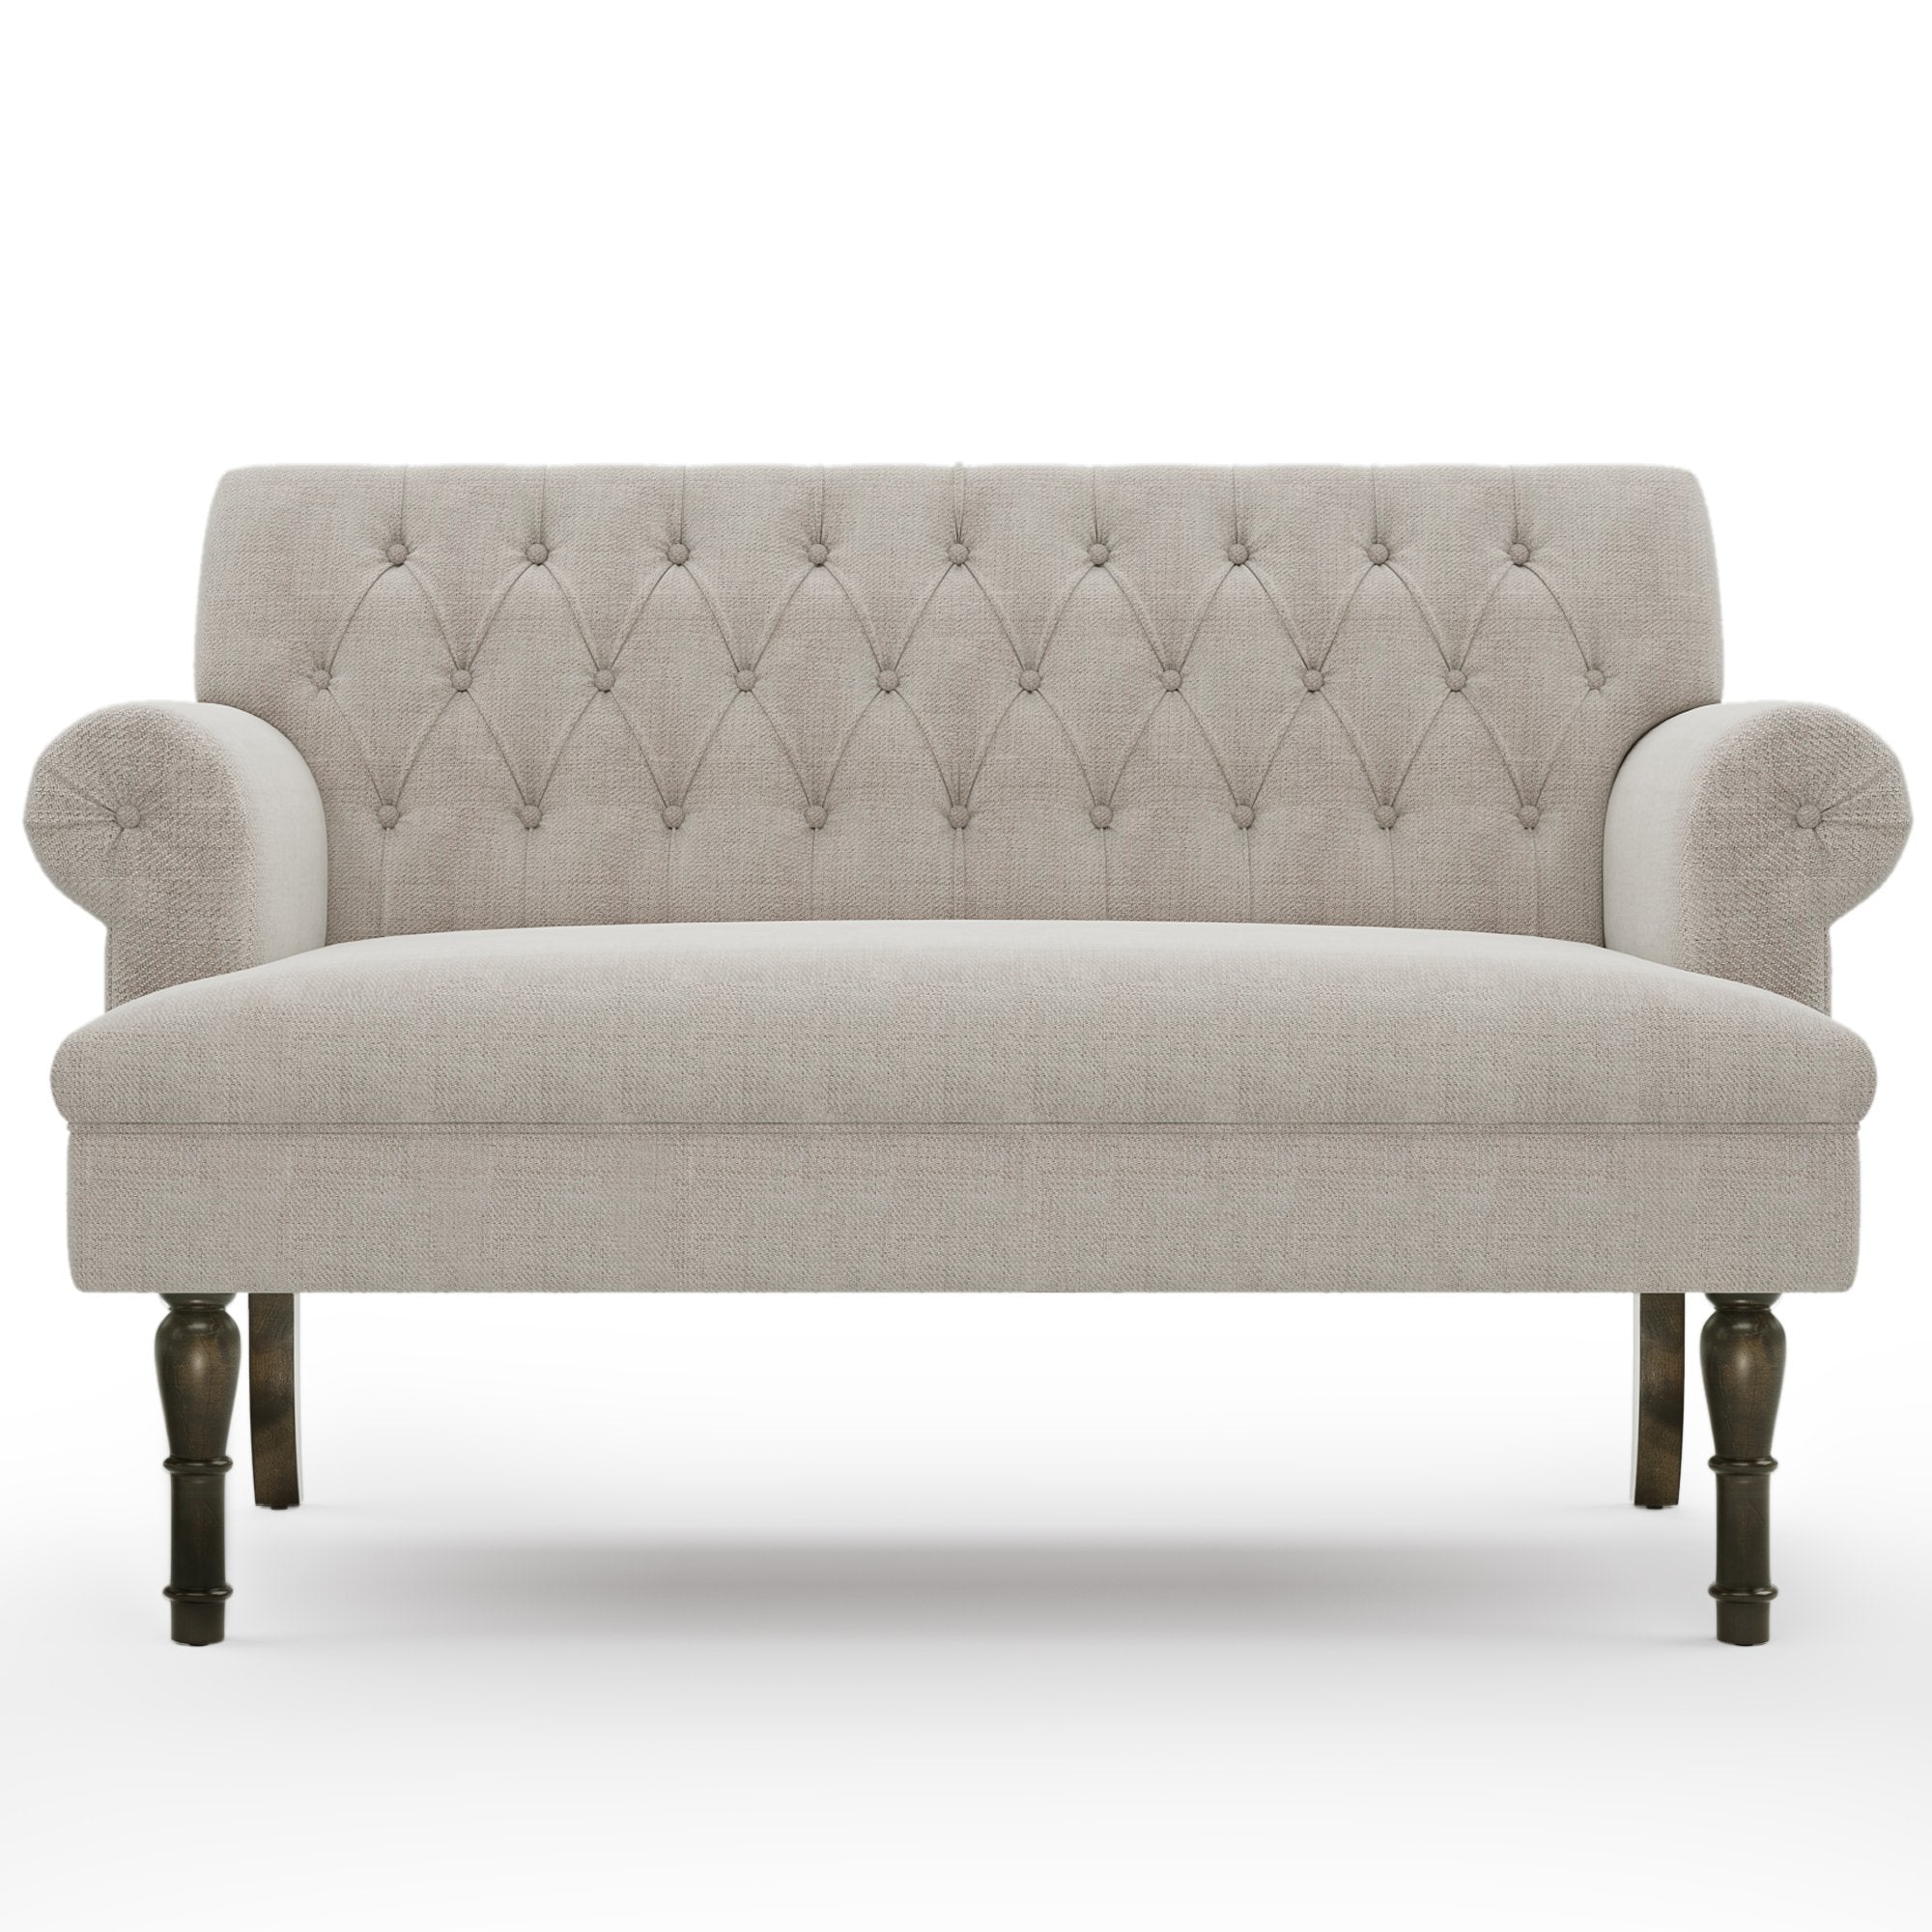 58" Linen Textured Fabric Chesterfield Settee Button Tufted Scrolled Arm Loveseat High Gourd Wood Leg Studio Bench (Pillows not included) Light Beige-Boyel Living